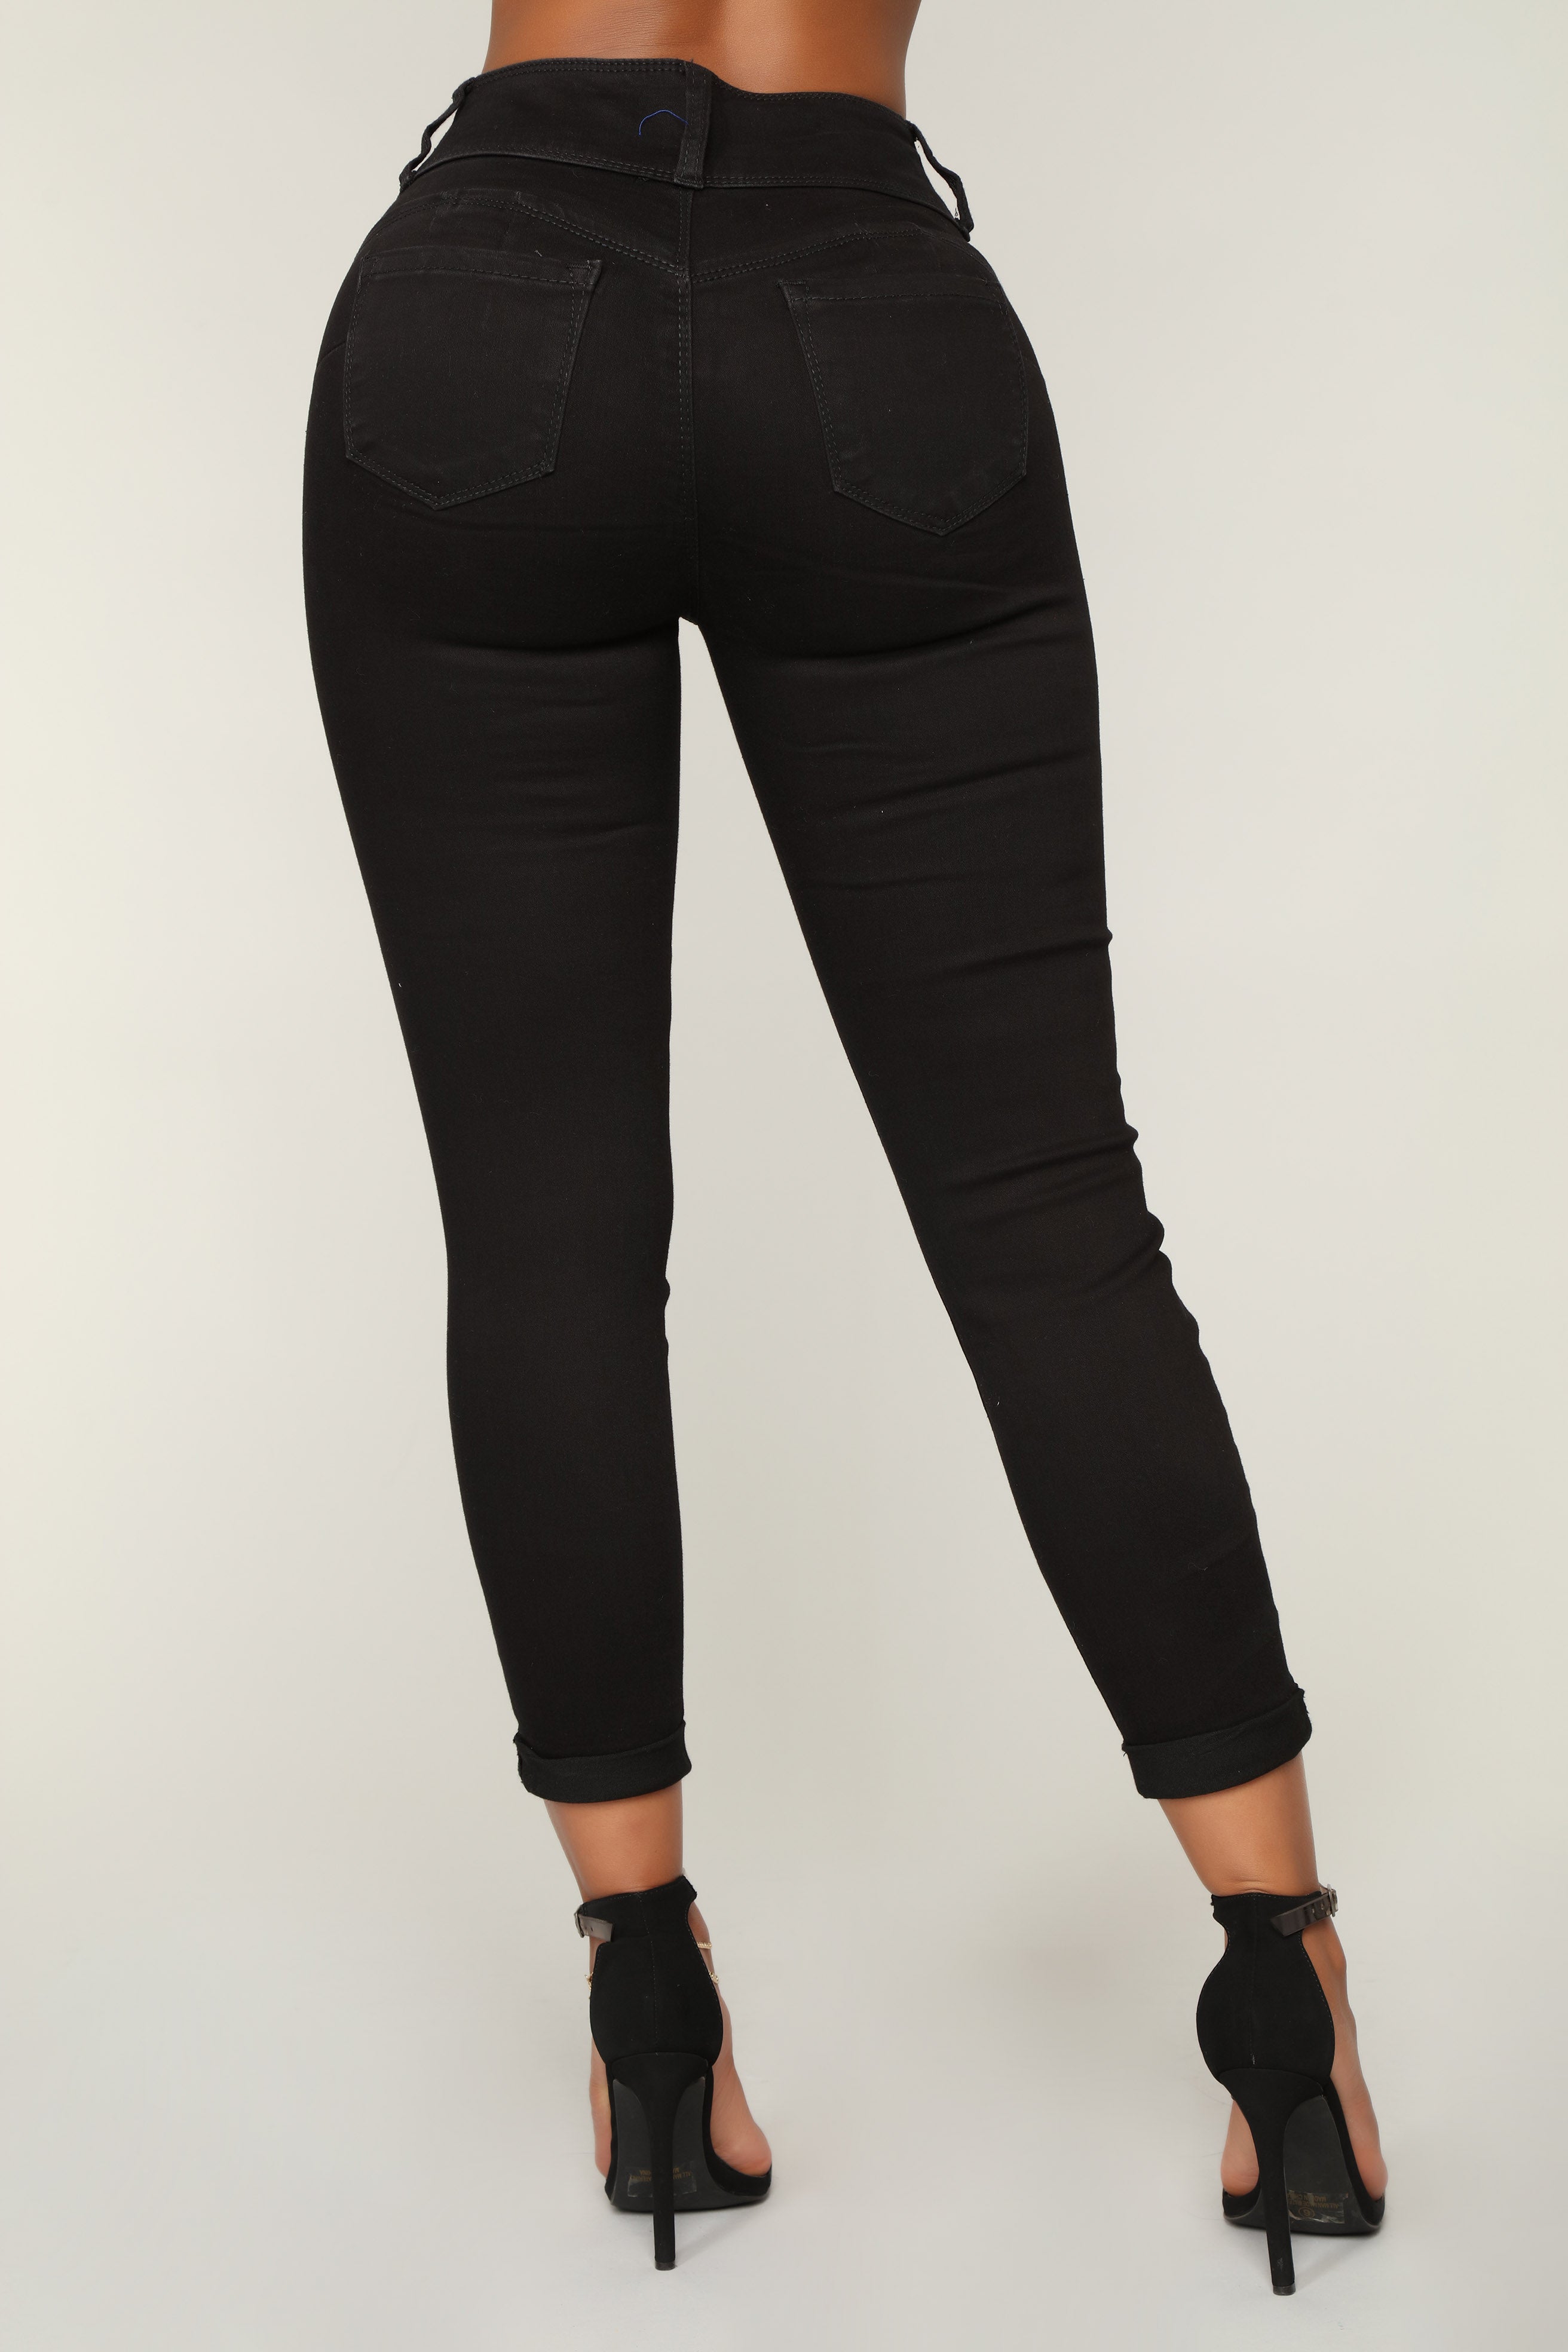 Forever Mine Booty Lifting Jeans - Black